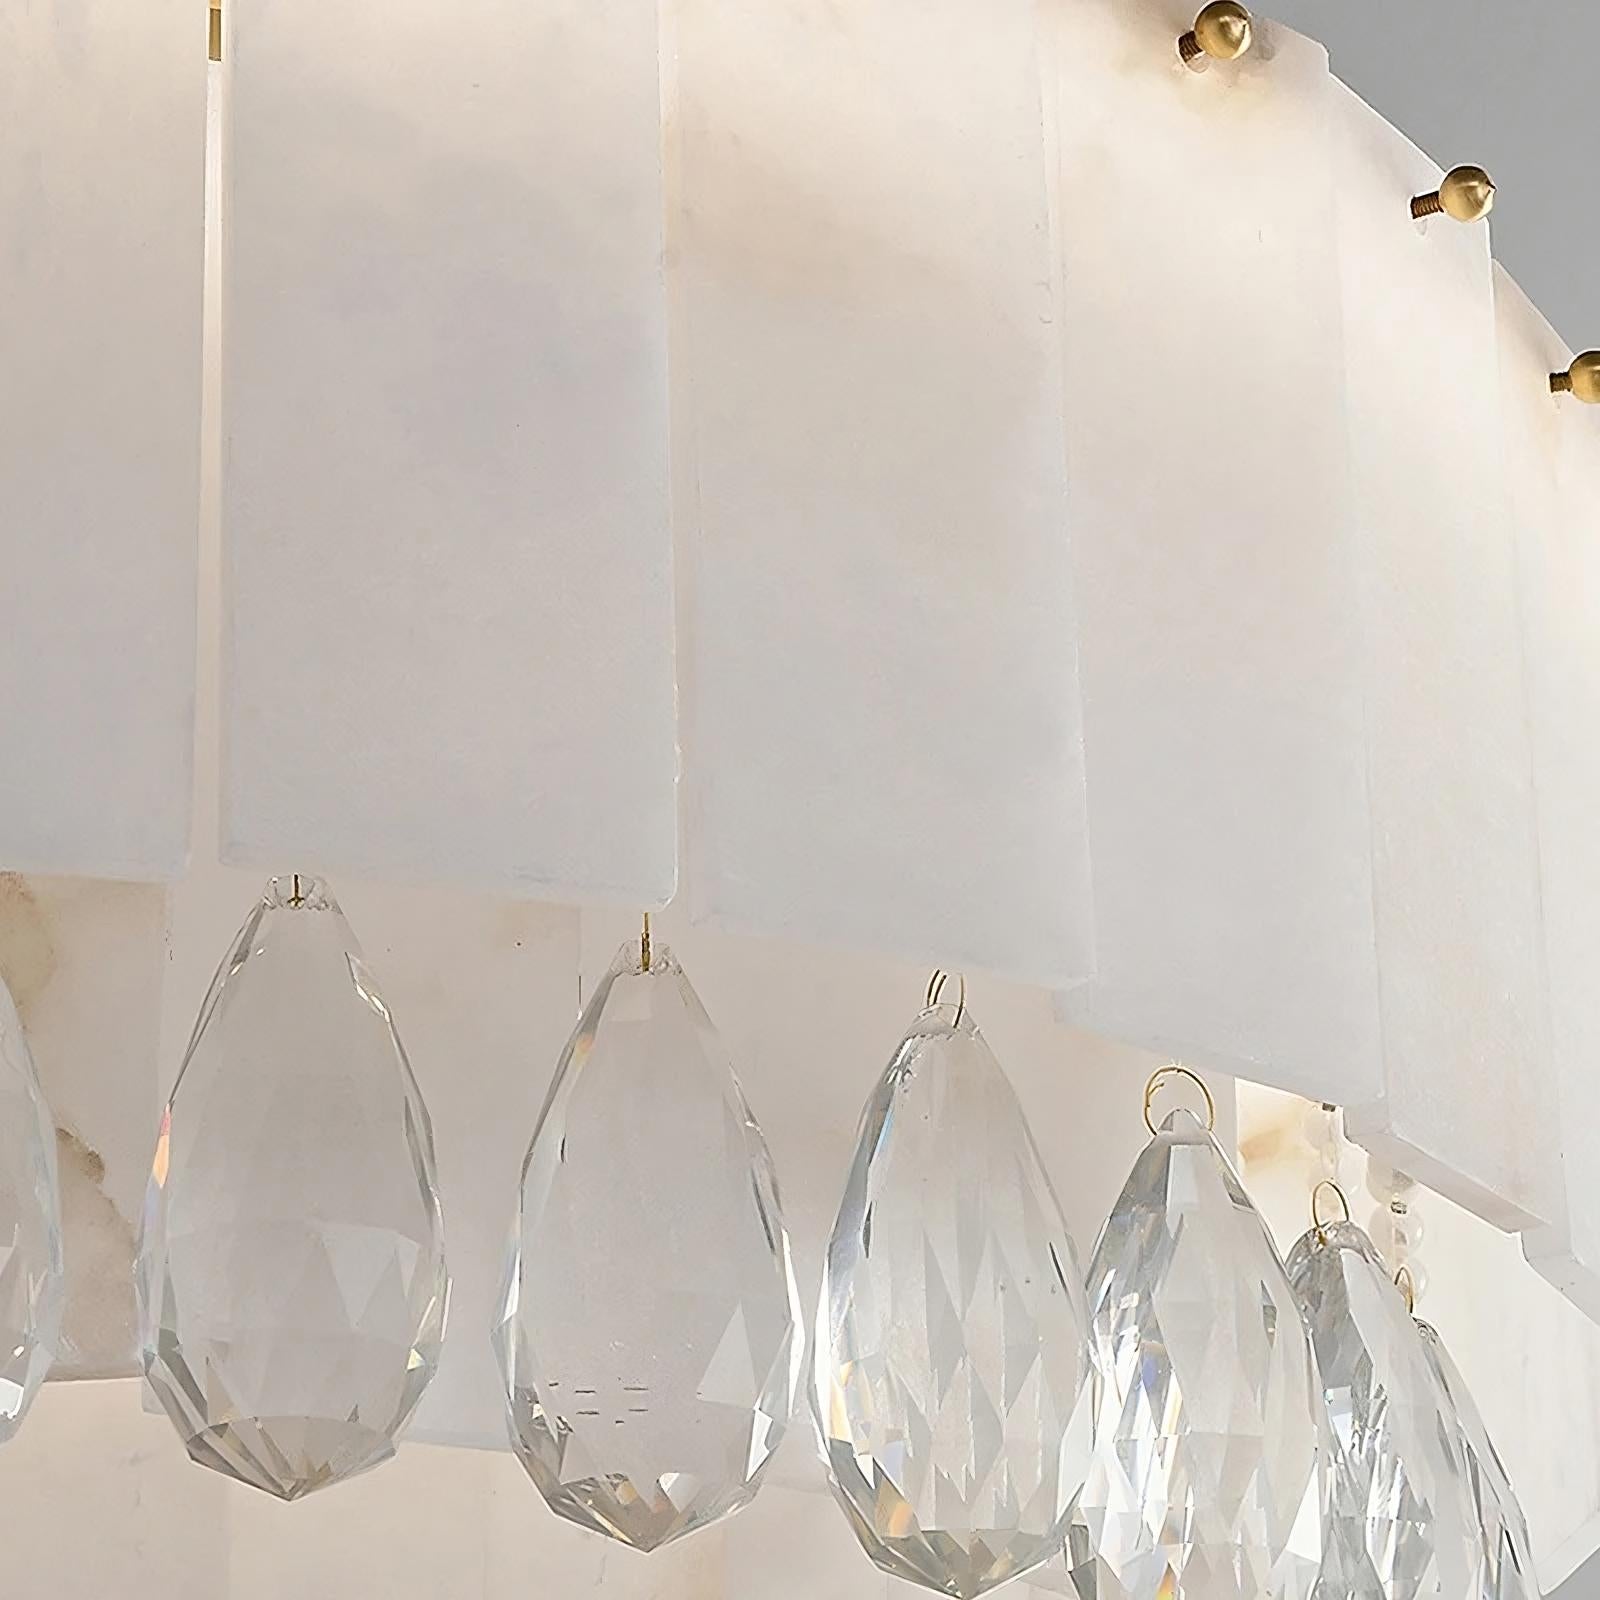 Close-up of the Modern Crystal and Spanish Marble Chandelier by Morsale.com, featuring white rectangular panels and multiple hanging teardrop-shaped crystals. Each crystal has a faceted surface, reflecting light and creating a shimmering effect. This elegant home decor piece boasts a minimalist yet luxurious design.